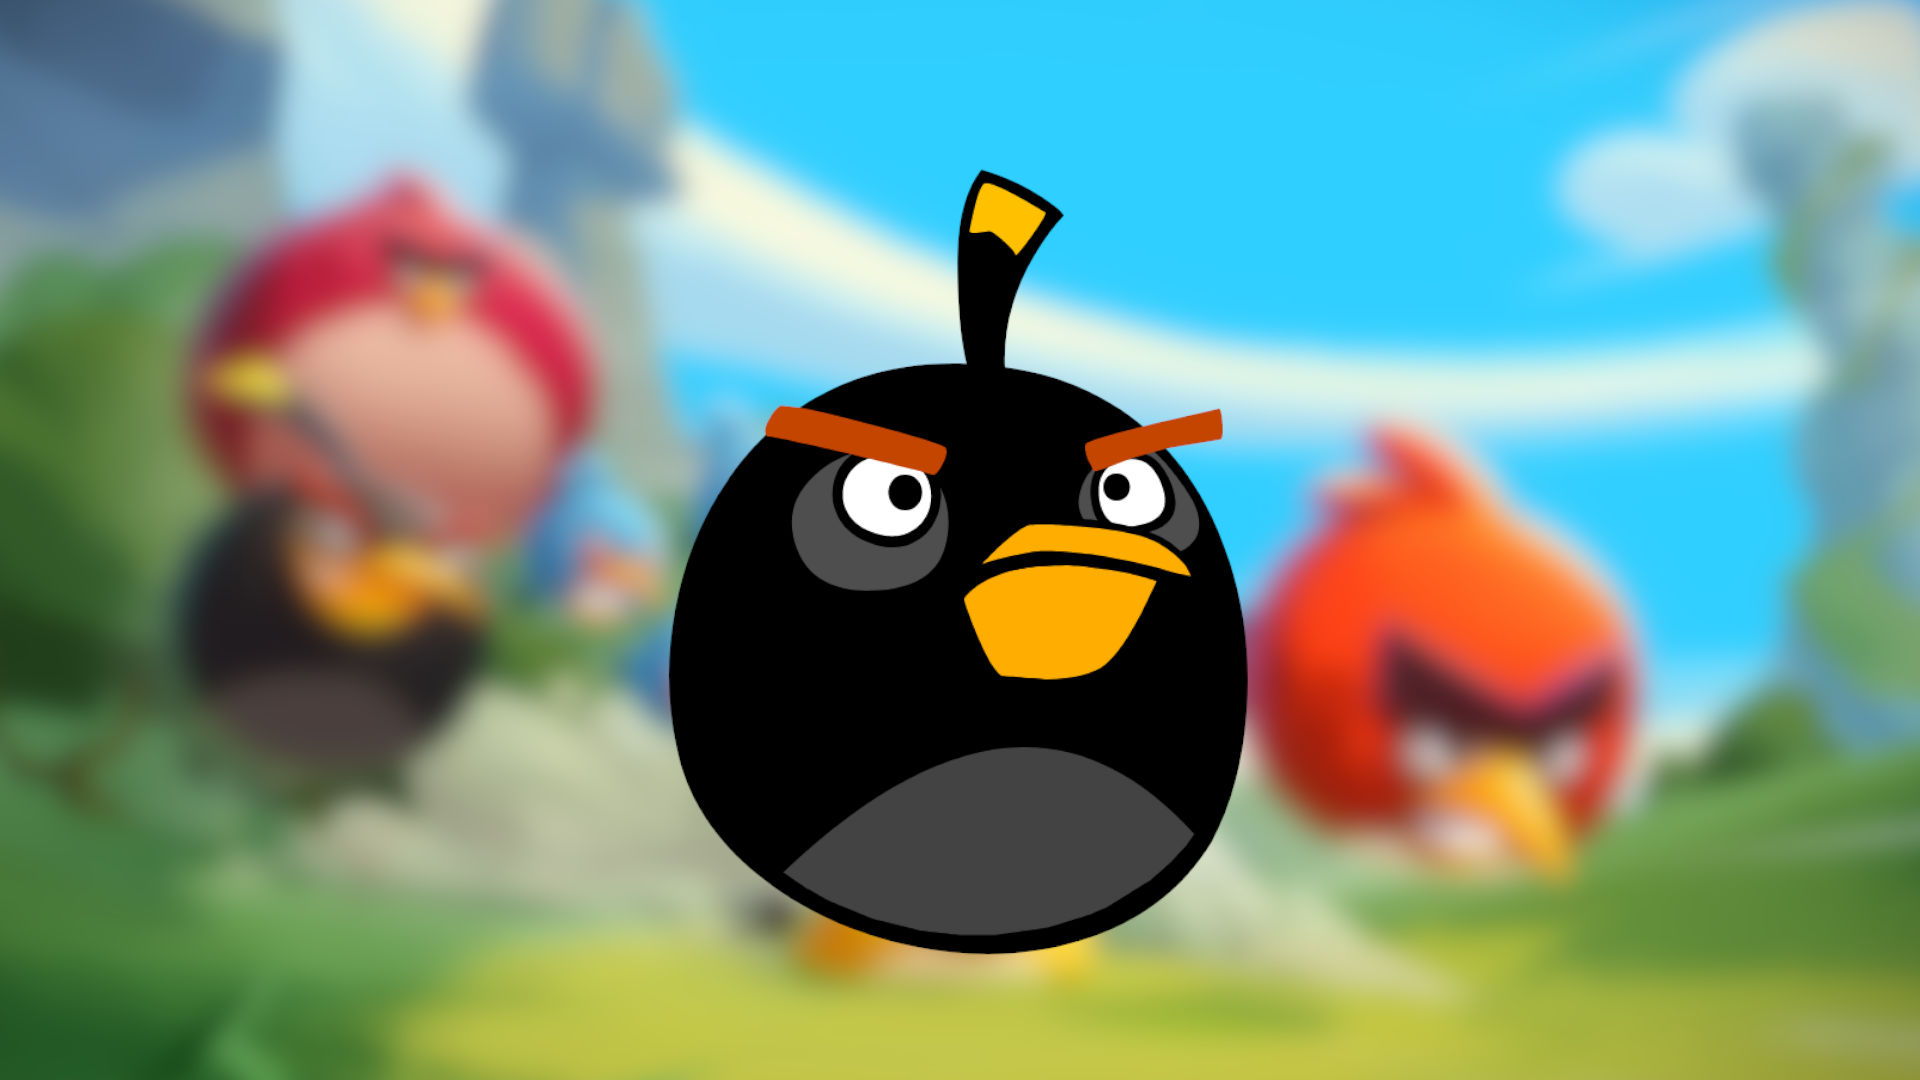 angry birds real game